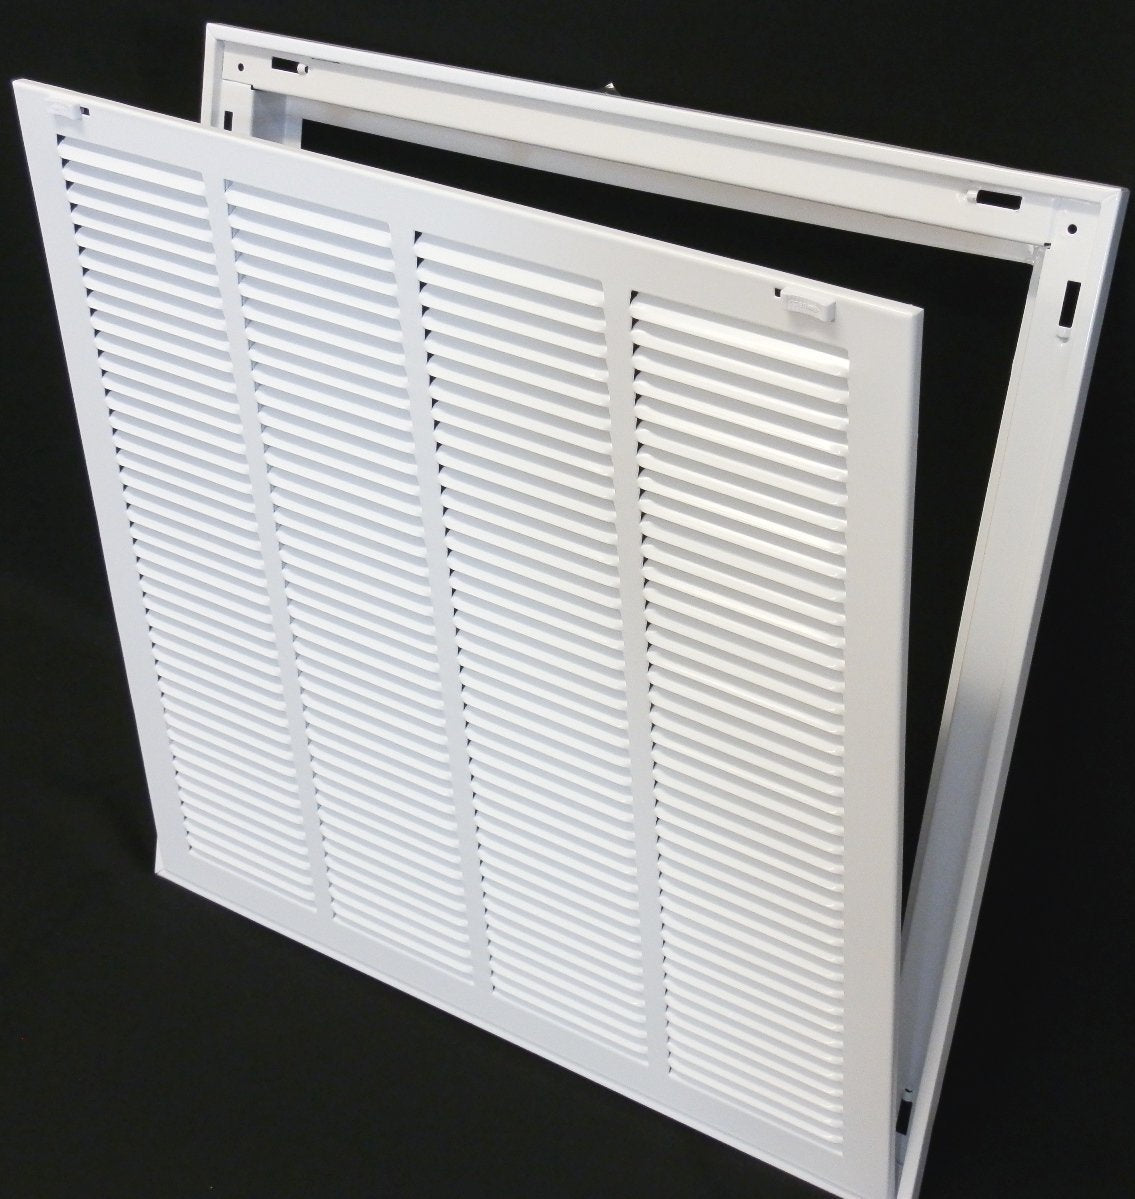 8&quot; X 14&quot; Steel Return Air Filter Grille for 1&quot; Filter - Removable Frame - [Outer Dimensions: 10 5/8&quot; X 16 5/8&quot;]